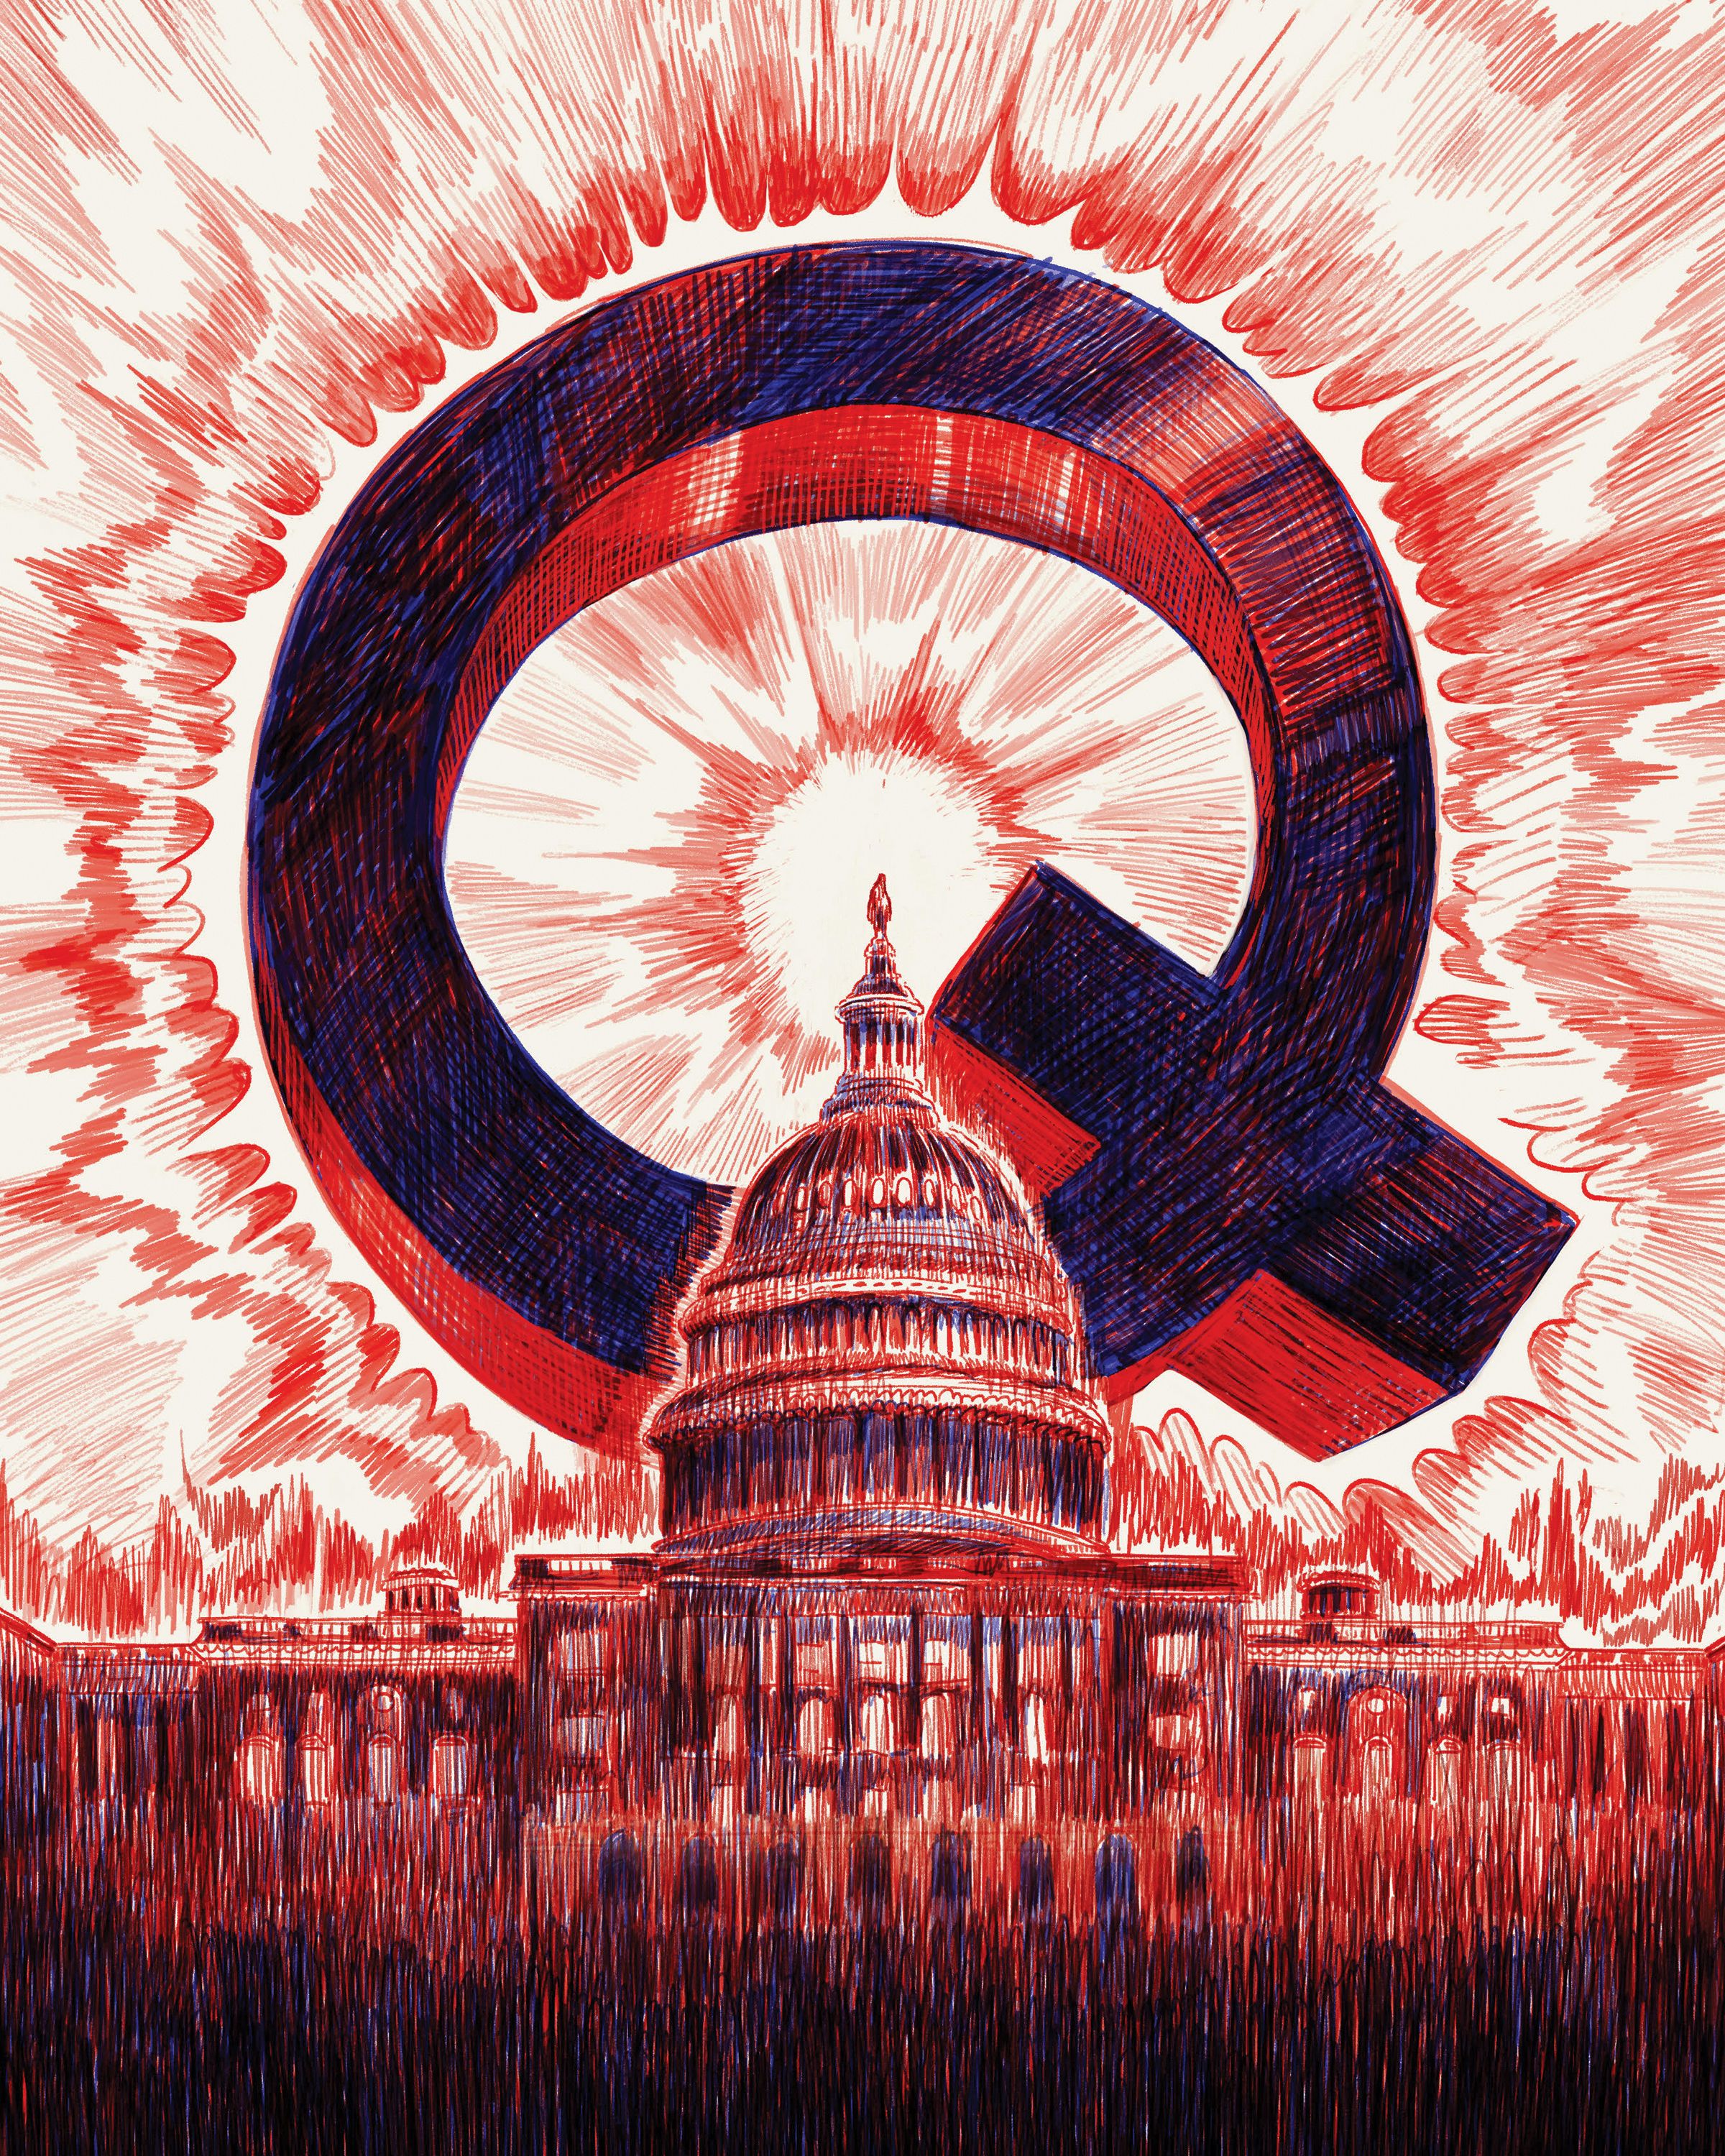 QAnon: Q returns after nearly two years of silence